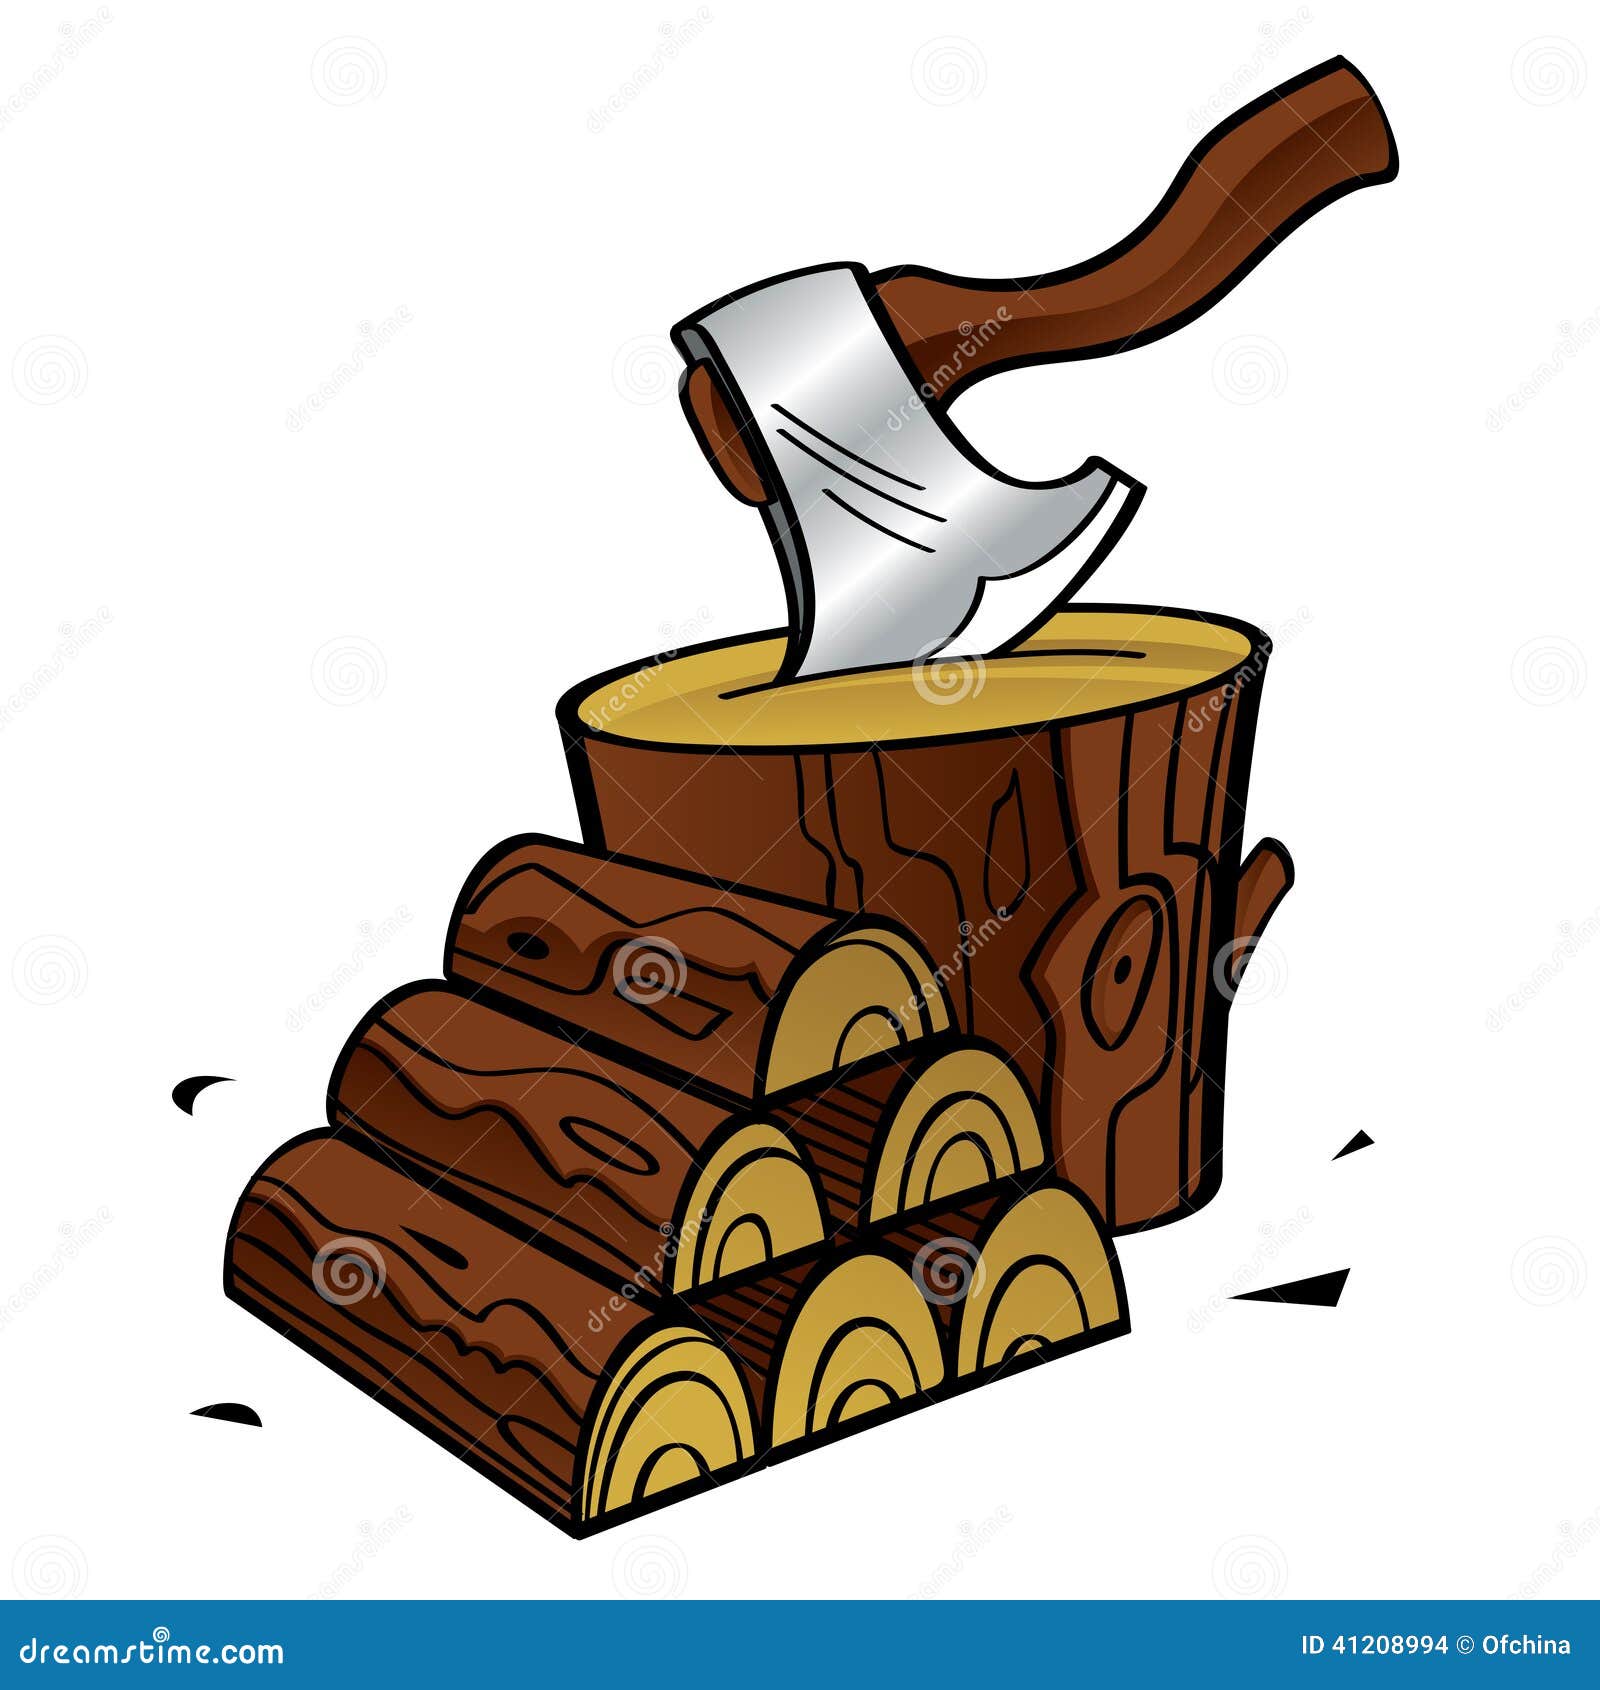 clipart wood fire - photo #13